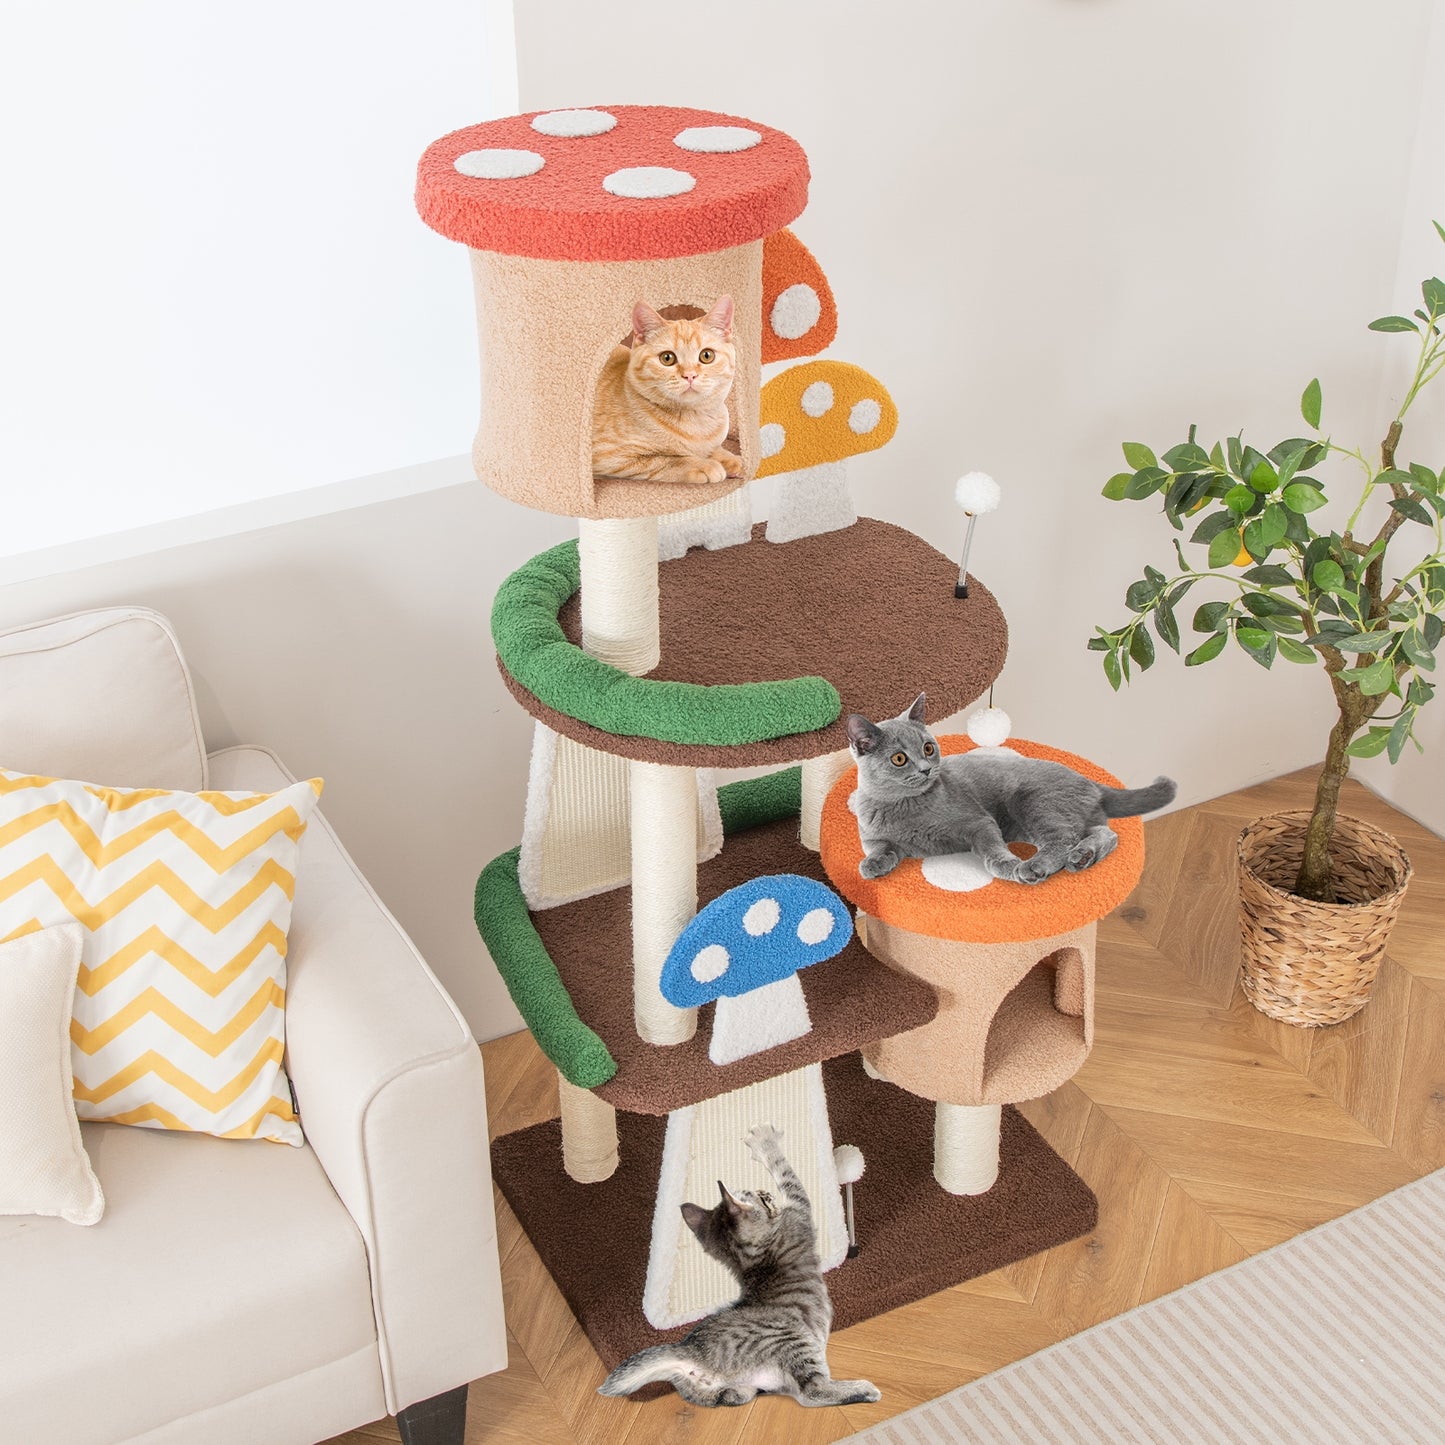 4-In-1 Cat Tree with 2 Condos and Platforms for Indoors-Multicolor